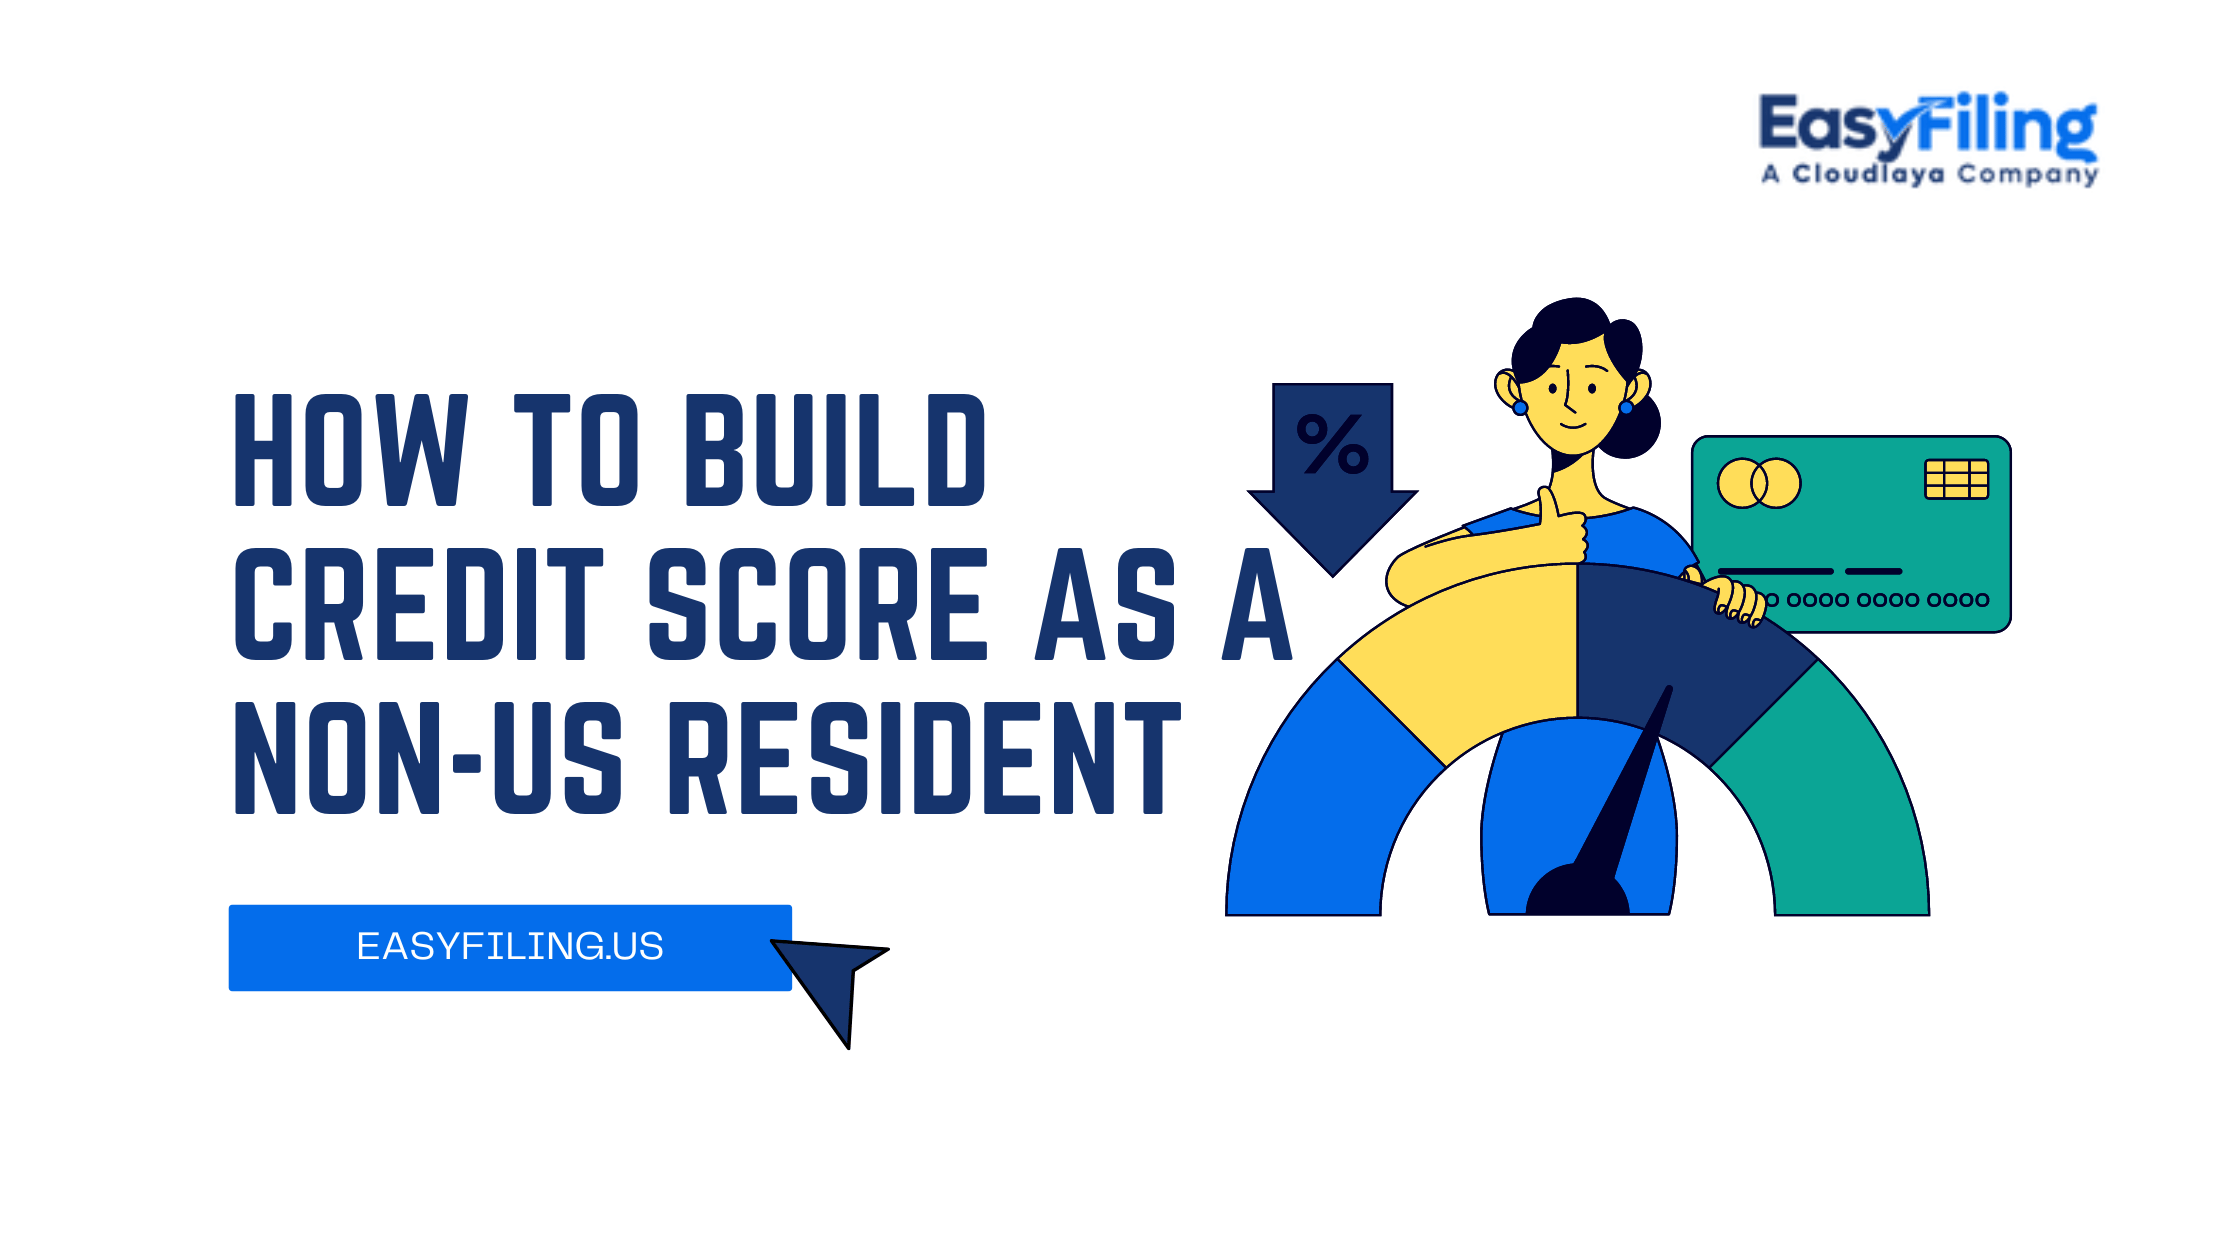 How to Build Credit Score as a Non-US Resident: Tips and Tricks